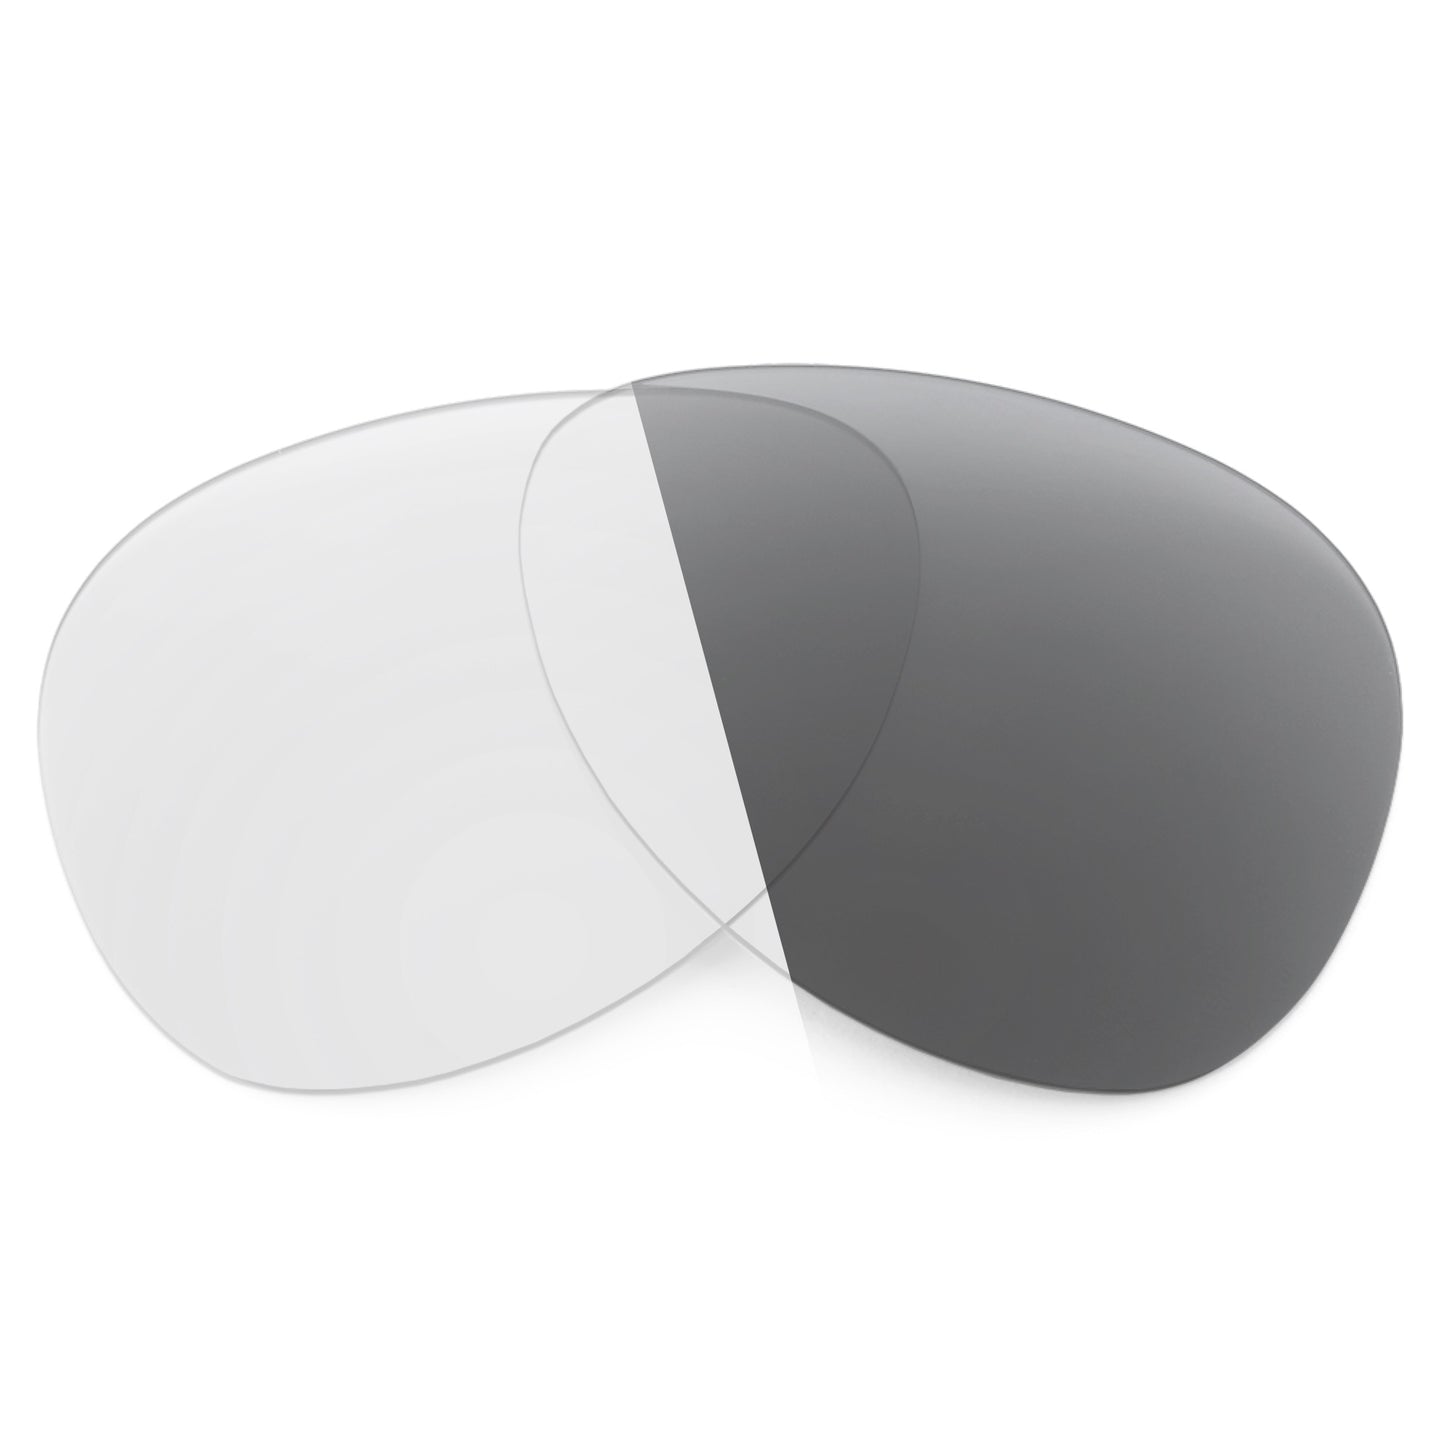 Revant replacement lenses for Ray-Ban Outdoorsman II Rainbow RB3407 58mm Non-Polarized Adapt Gray Photochromic